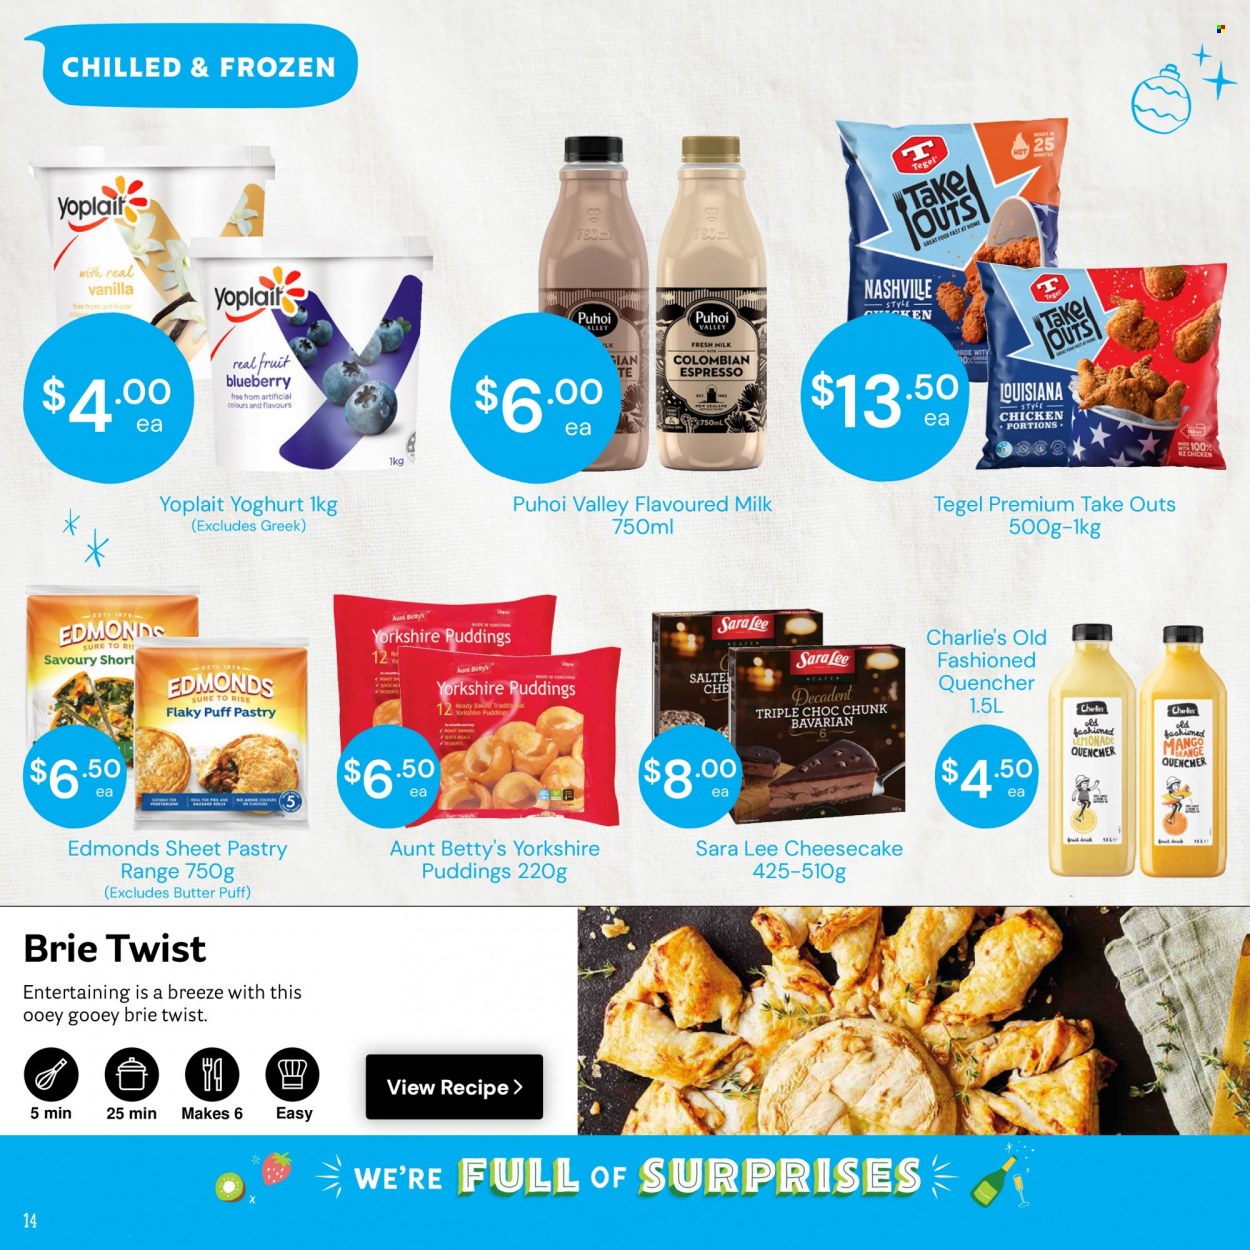 thumbnail - Fresh Choice mailer - 28.11.2022 - 04.12.2022 - Sales products - Sara Lee, cheesecake, oranges, sausage, brie, pudding, yoghurt, Yoplait, milk, flavoured milk, butter, puff pastry, lemonade, fruit drink, Sure. Page 14.